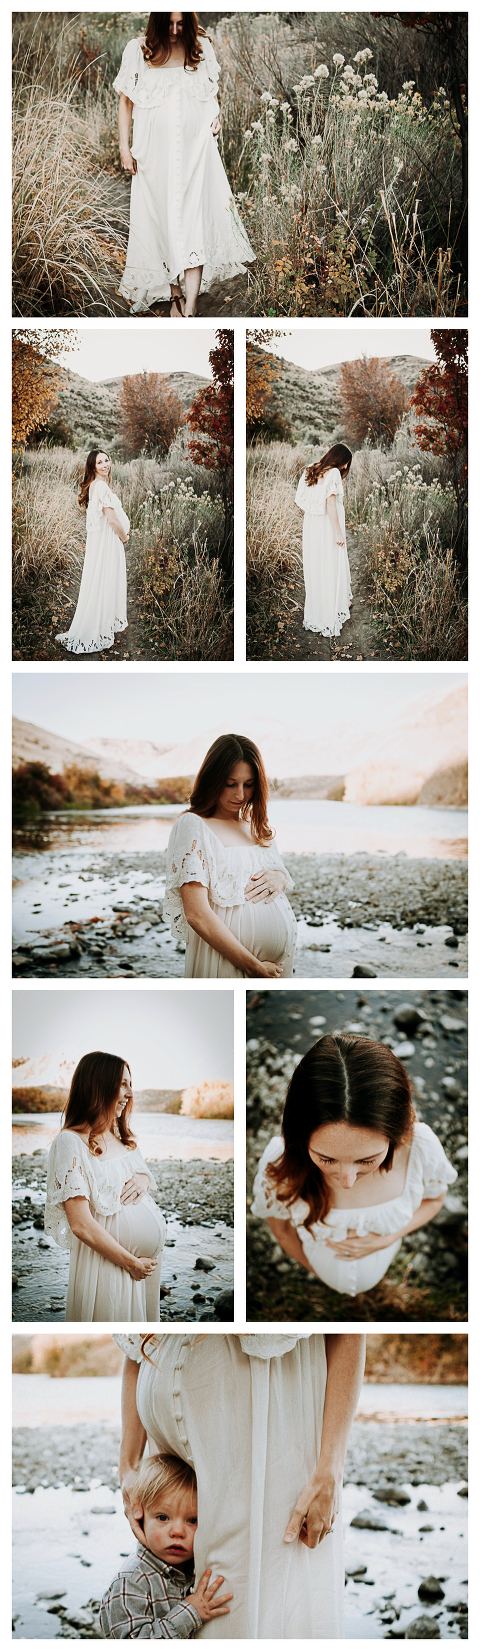 Olson family lifestyle maternity photography by Hailey Haberman in Ellensburg WA